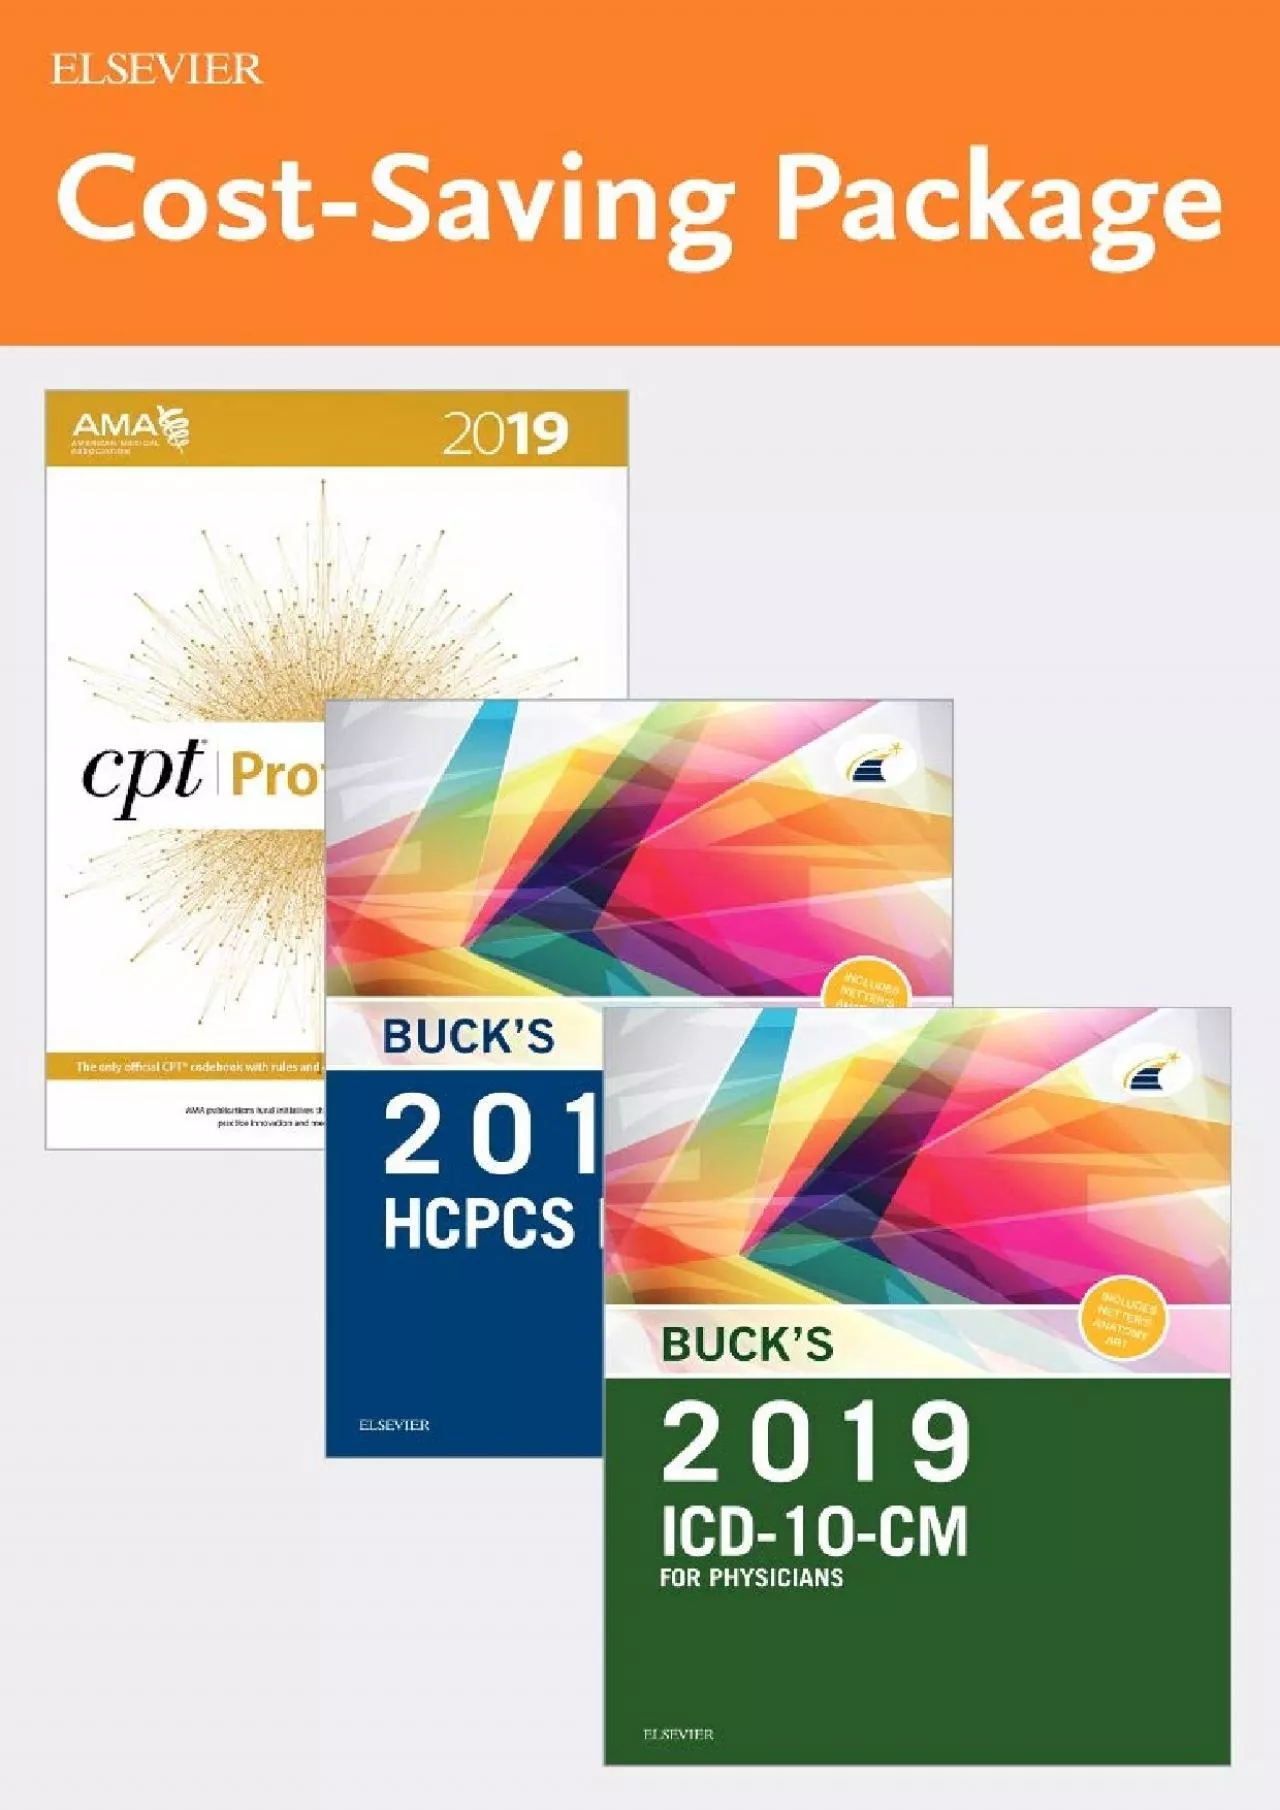 (BOOK)-2019 ICD-10-CM Physician Edition, 2019 HCPCS Professional Edition and AMA 2019